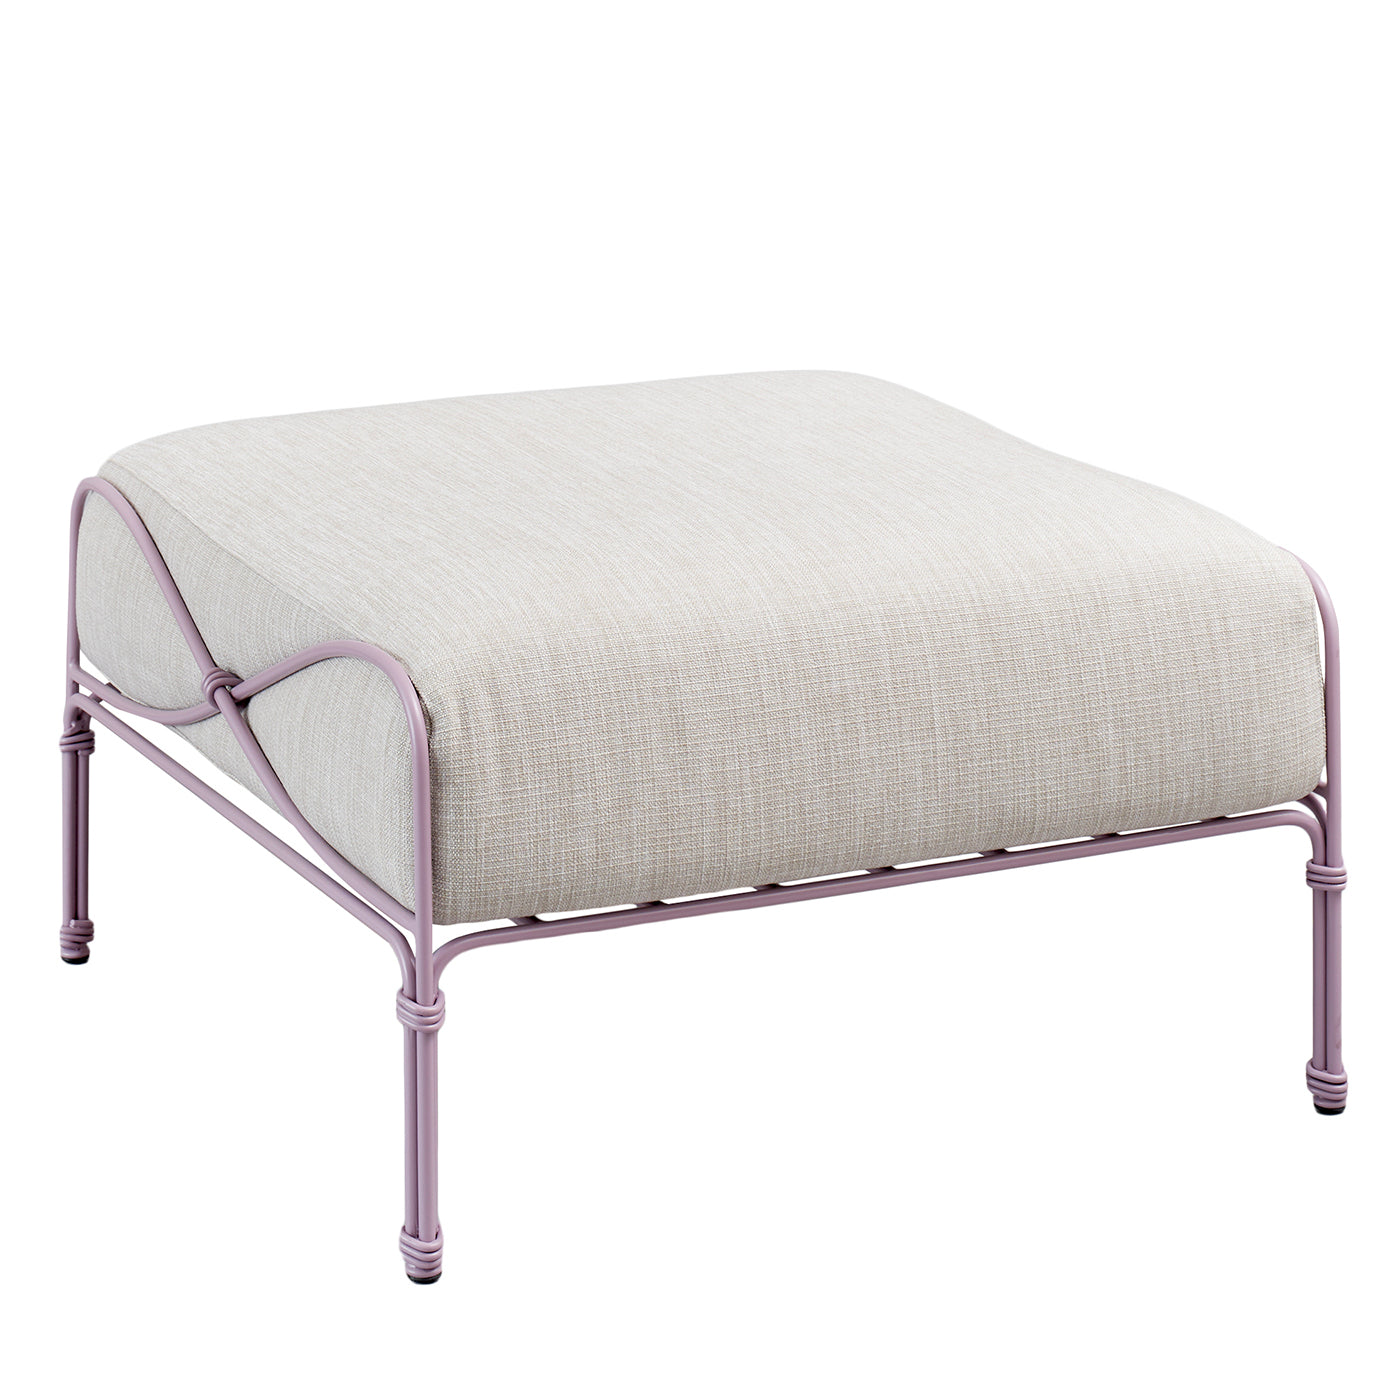 Vitis Lilac and Beige Ottoman by Ciarmoli Queda Studio in Stainless Steel - Main view